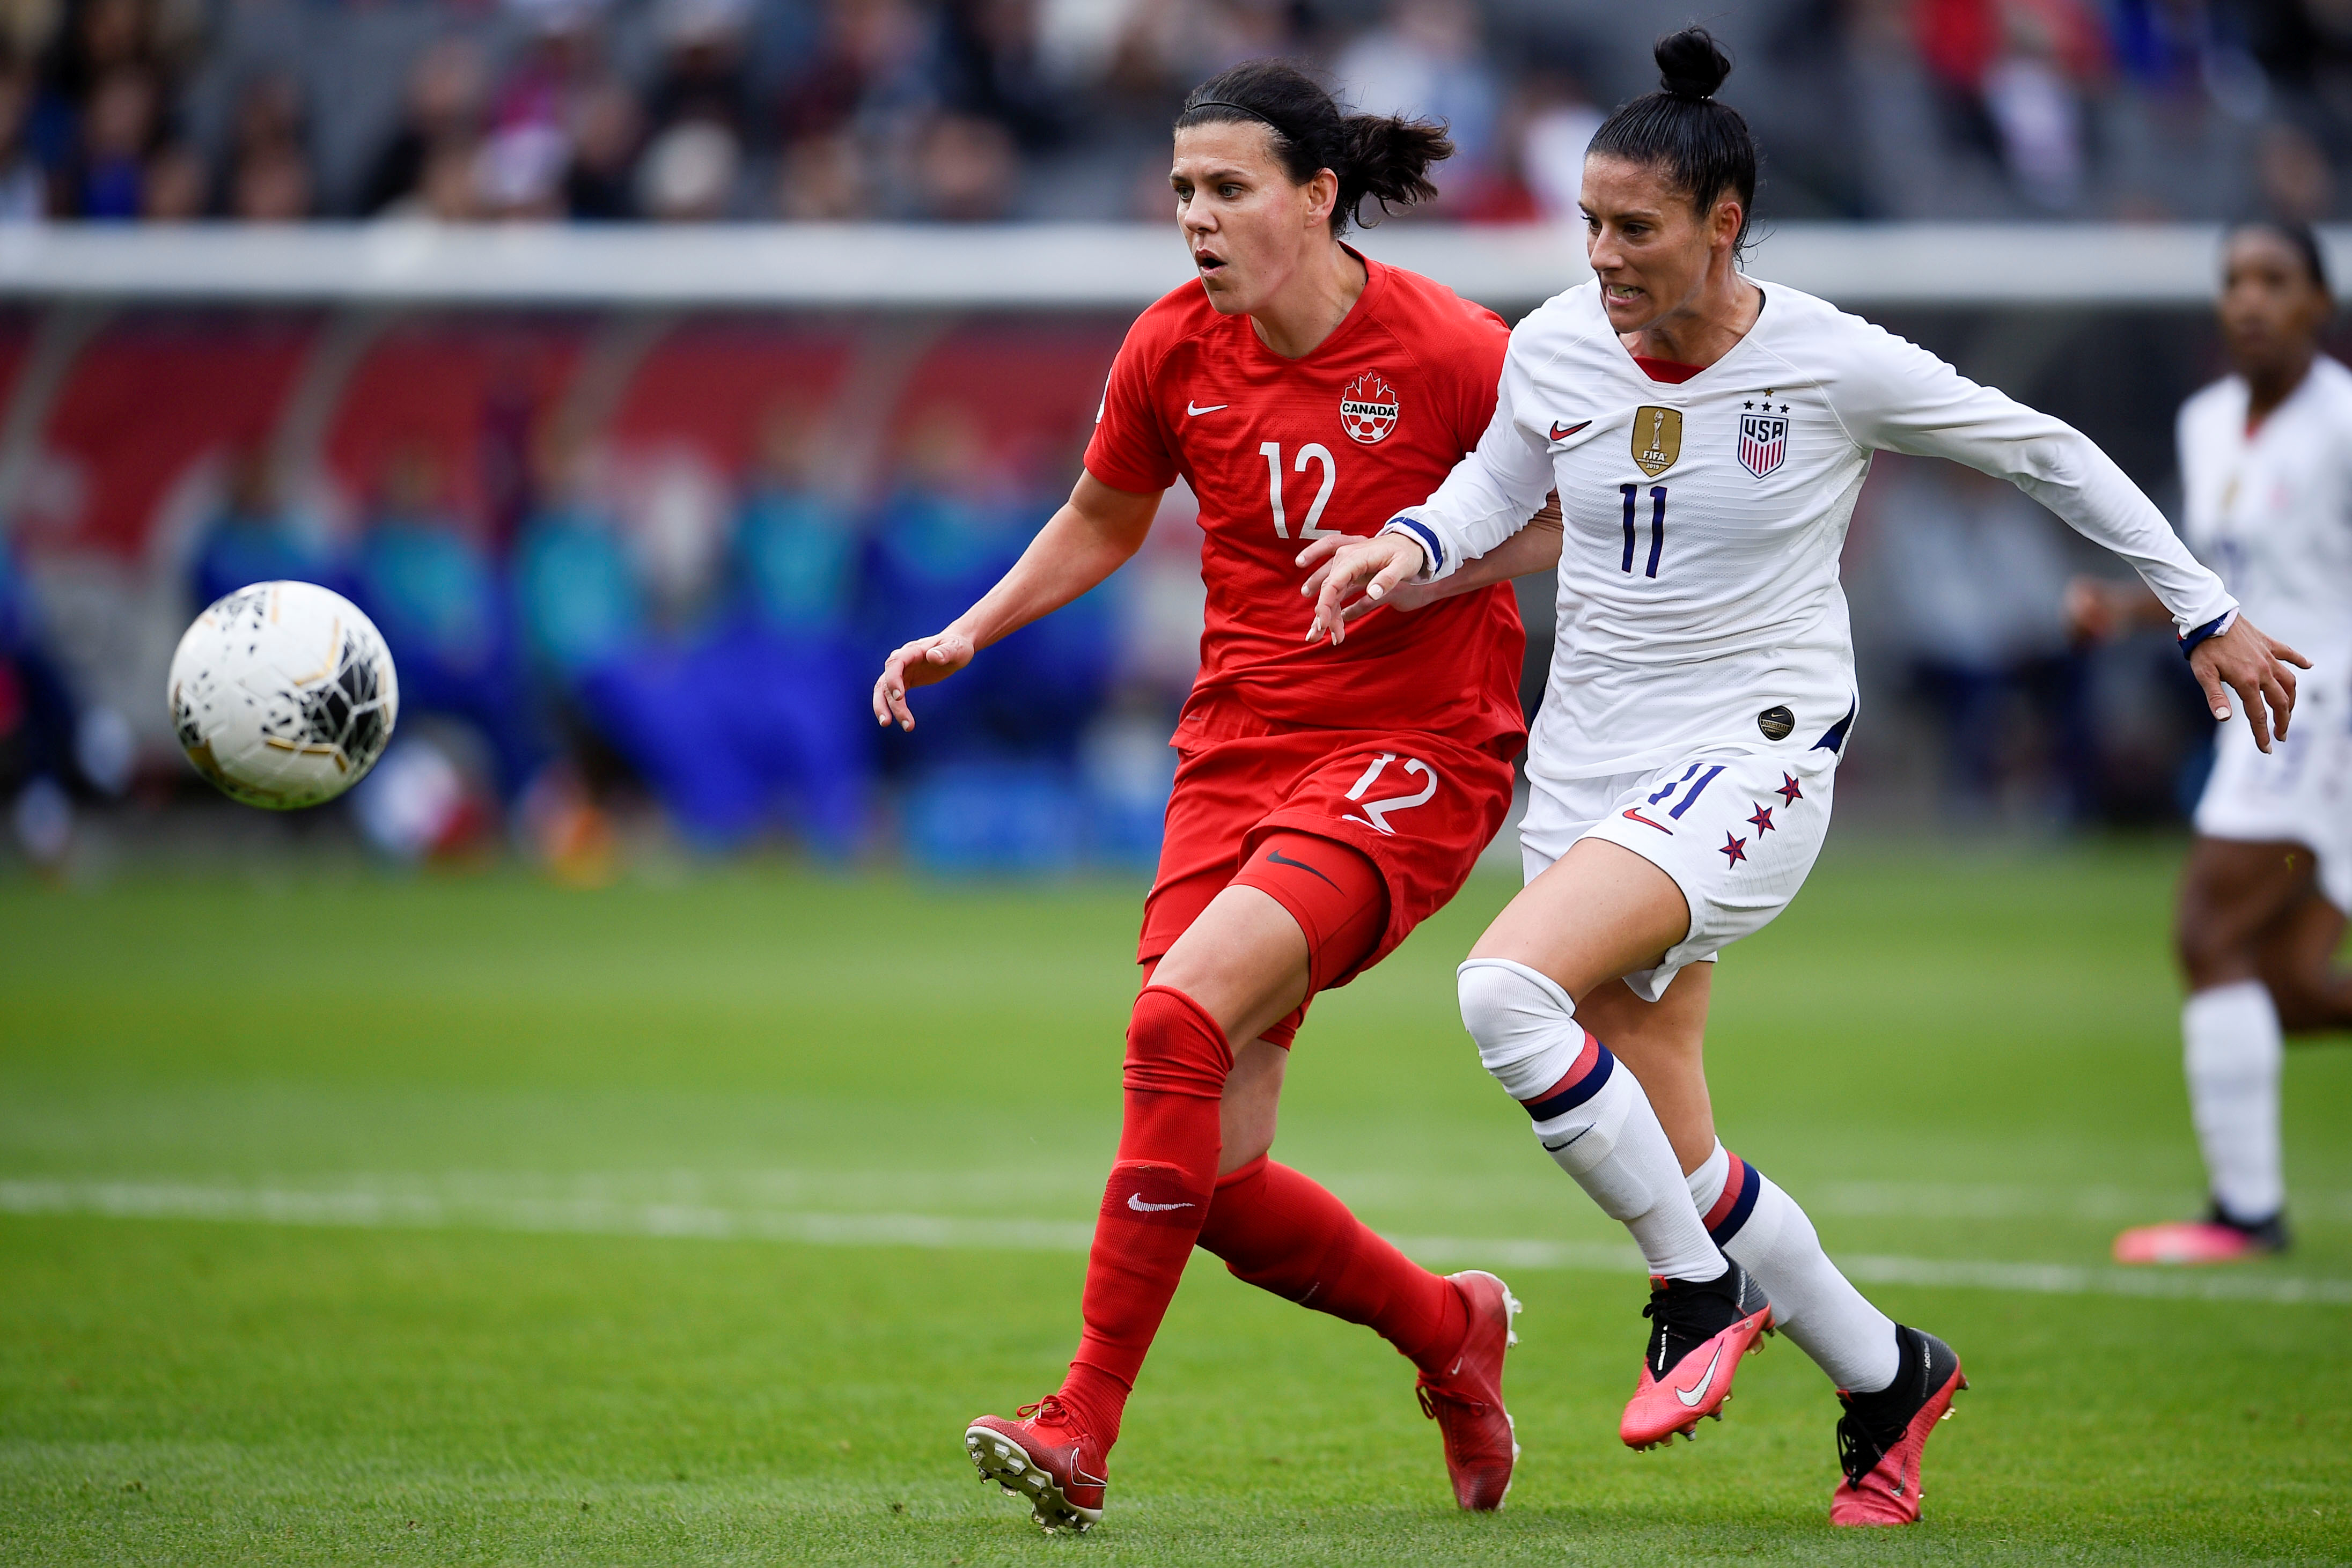 FILE PHOTO: Feb 9, 2020; Los Angeles, Colorado, USA; Canada forward Christine Sinclair (12) and United States defender Ali Krieger (11) chase down the ball during the first half of the CONCACAF Women's Olympic Qualifying soccer tournament at Dignity Health Sports Park. Mandatory Credit: Kelvin Kuo-USA TODAY Sports/File Photo